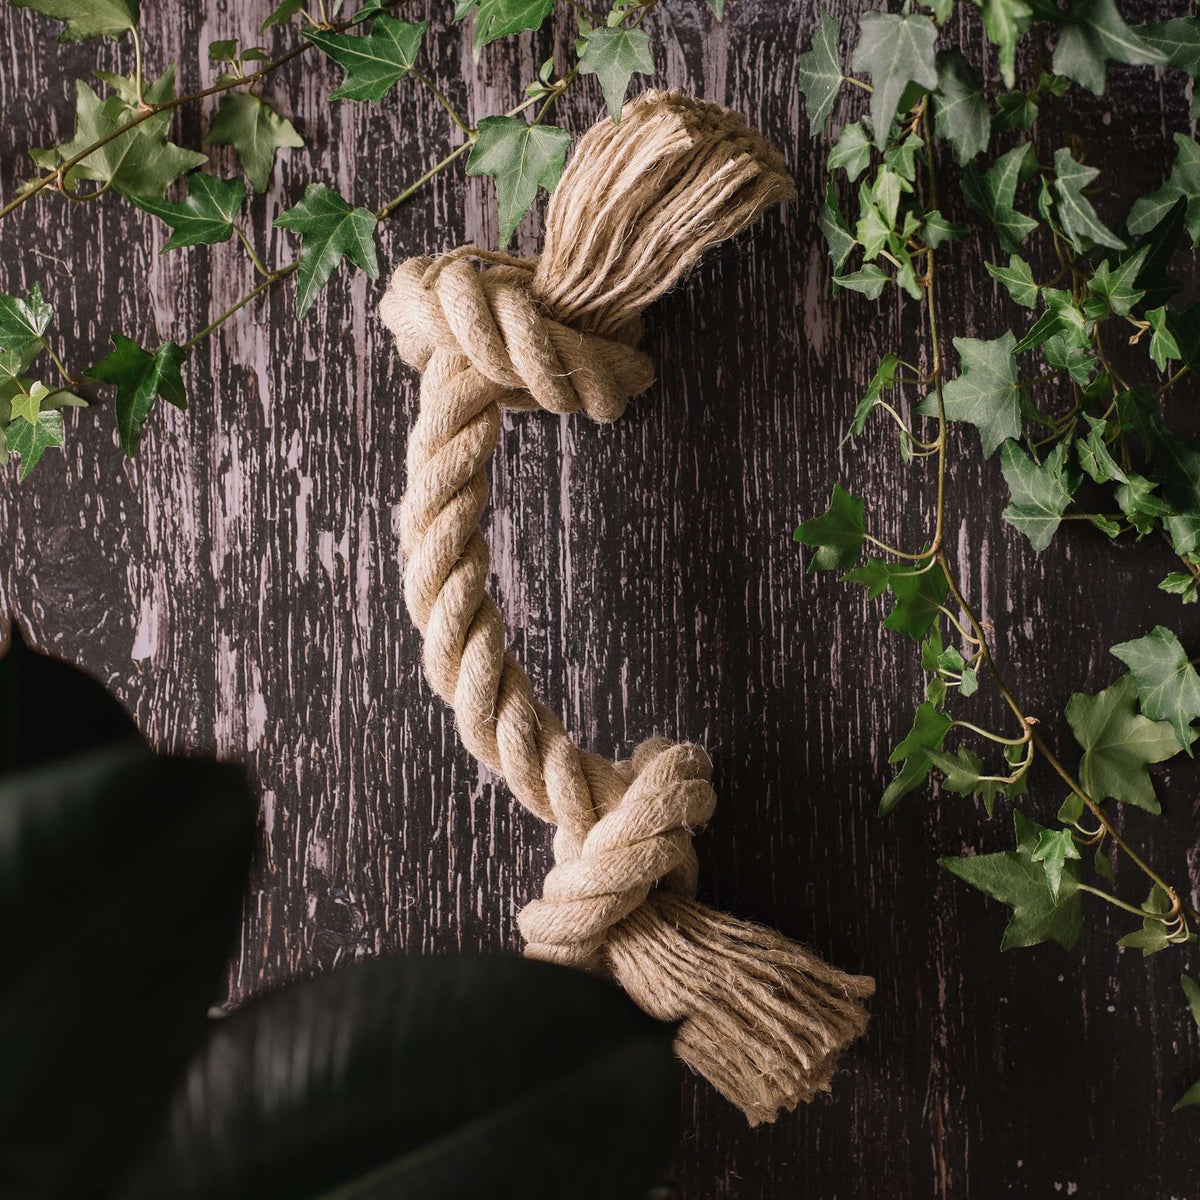 Knot Twice - Smug Mutts Natural and Organic Hemp Rope Toy with Two Knots Natural and Eco Friendly Dog Toy